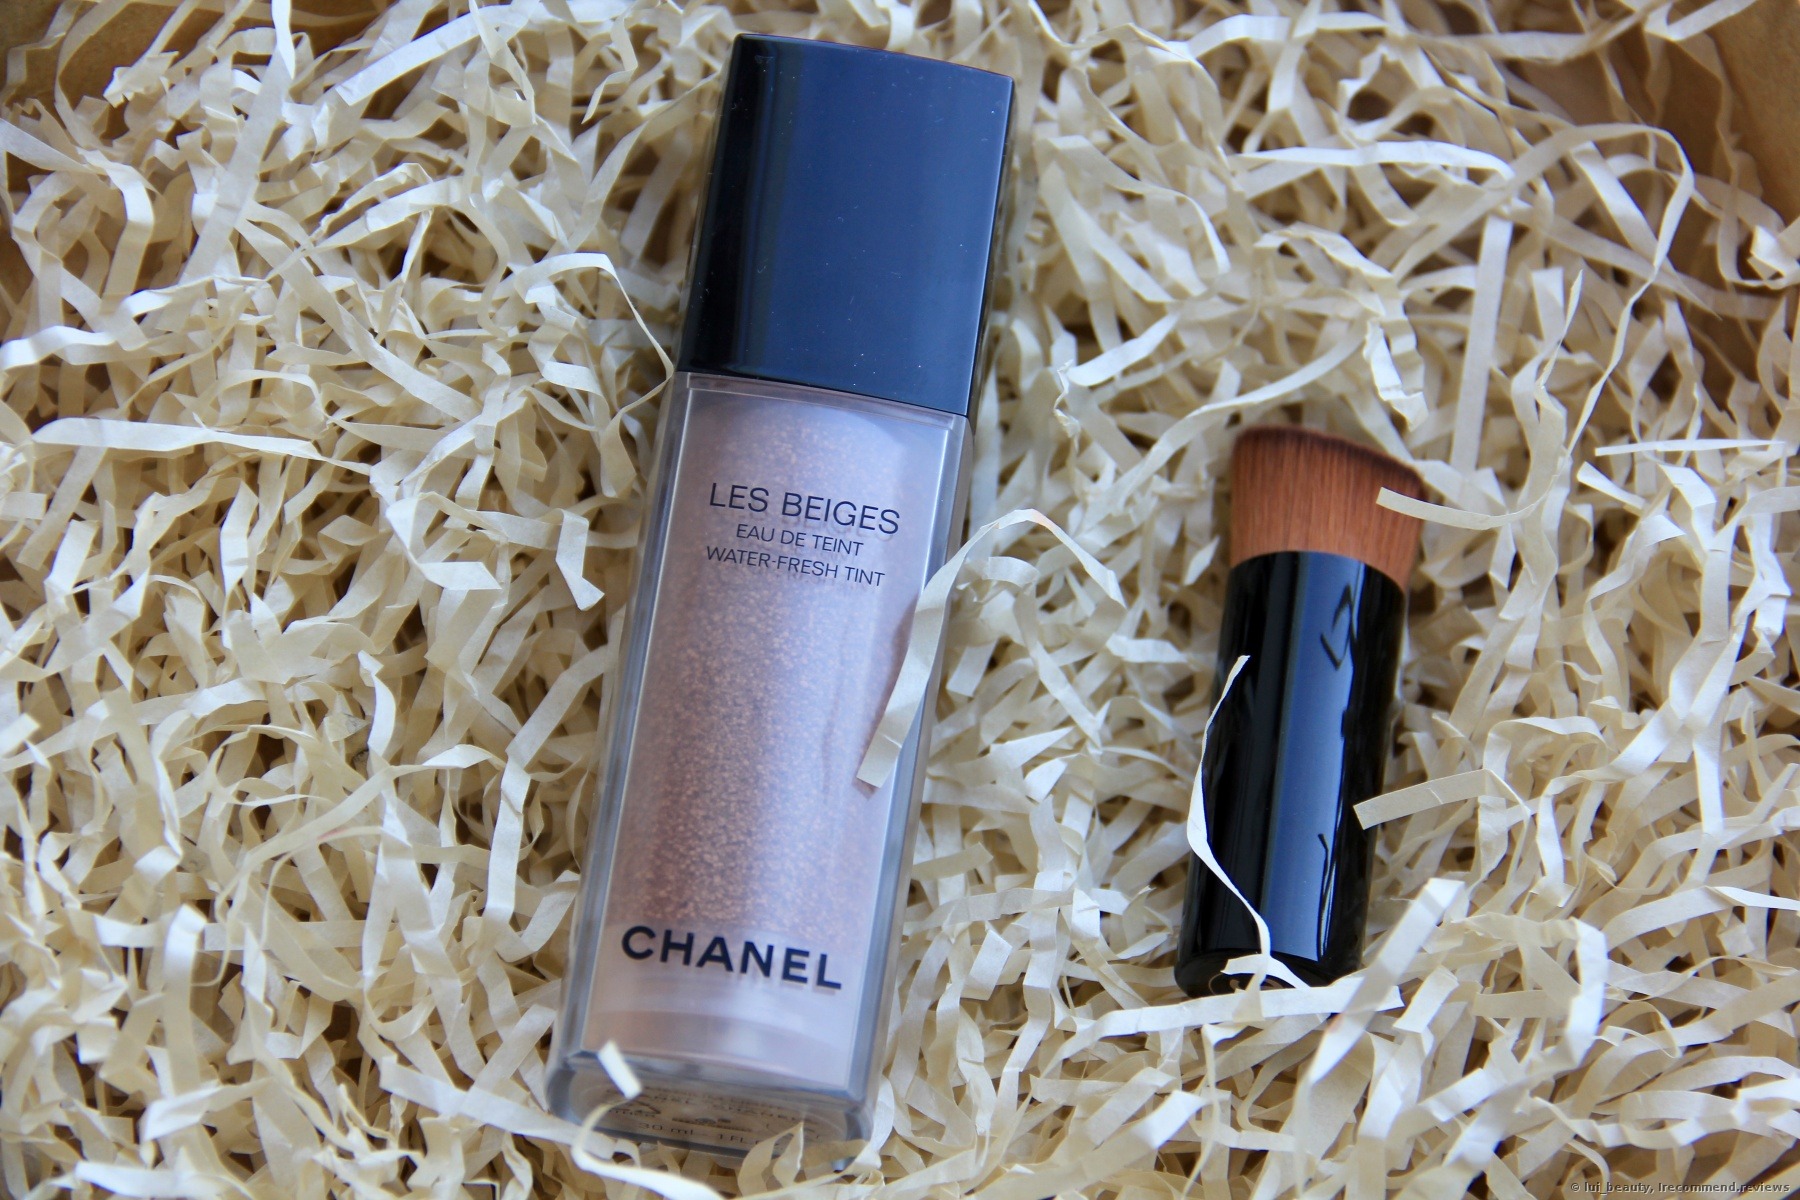 Chanel Les Beiges Water-Fresh Tint - «The most lightweight water